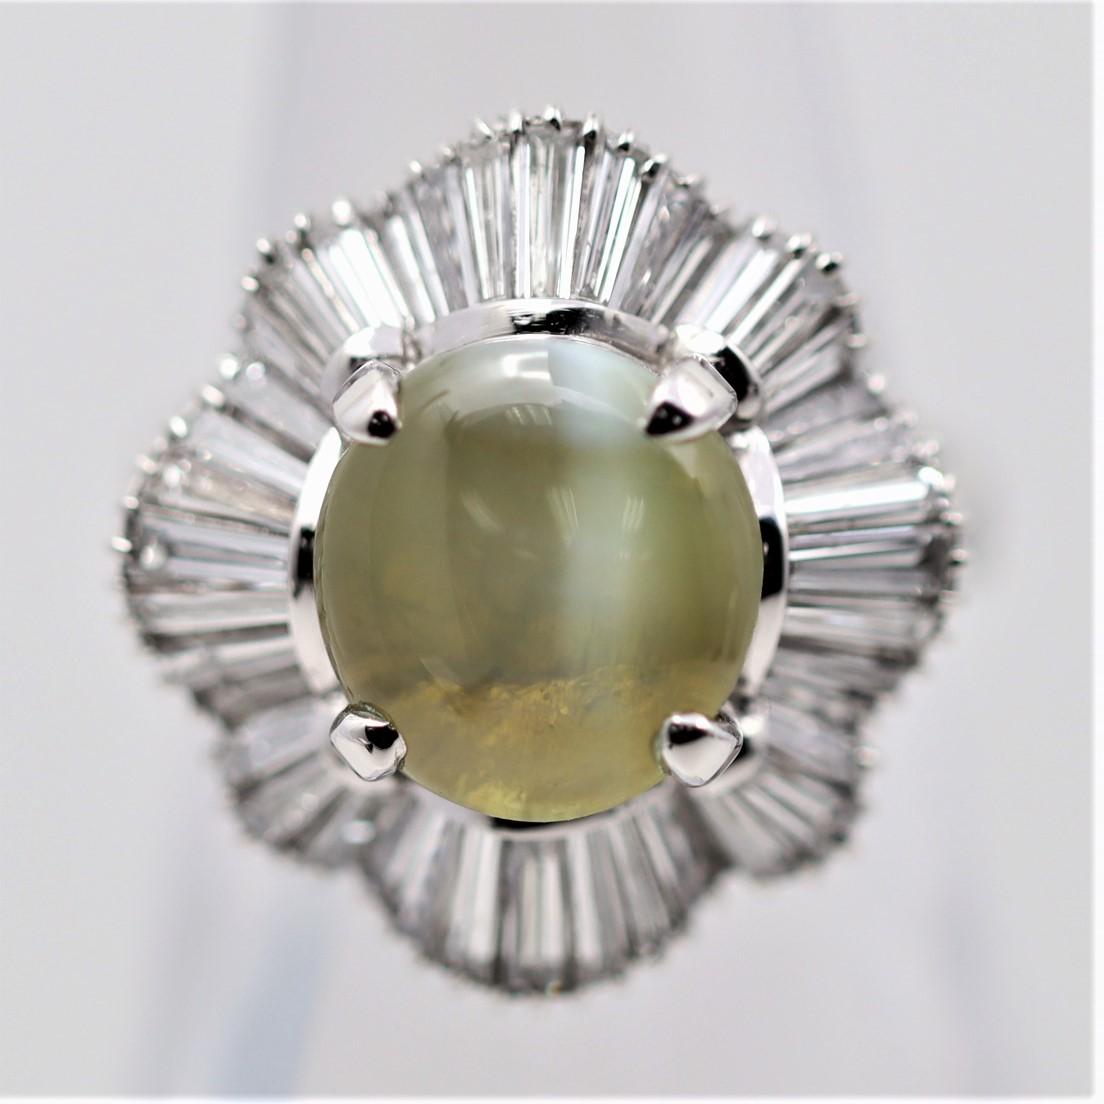 A lovely fine quality, platinum made, ring featuring a gem 6.78ct cats eye chrysoberyl with fantastic chatoyancy (cats eye effect). When a light hits the top of the chrysoberyl, a slime and fine chatoyant “eye” can be seen across the stone. It is